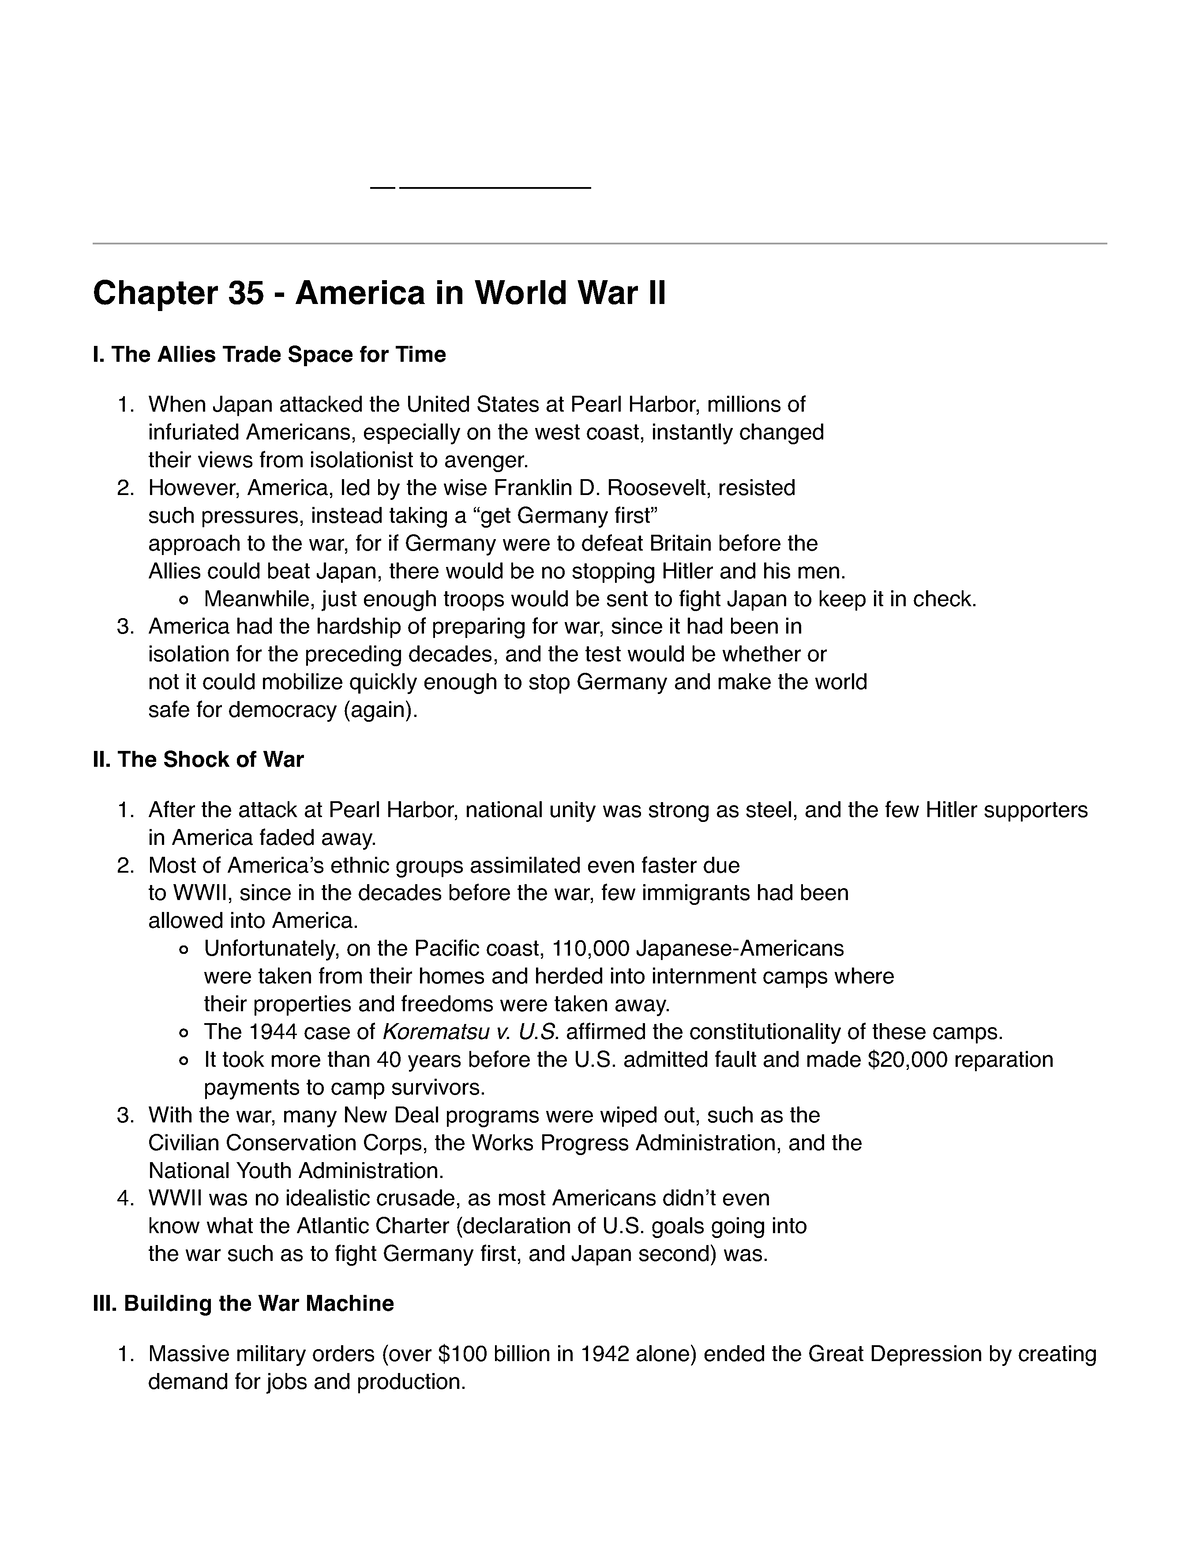 chapter-35-america-in-world-war-ii-the-allies-trade-space-for-time